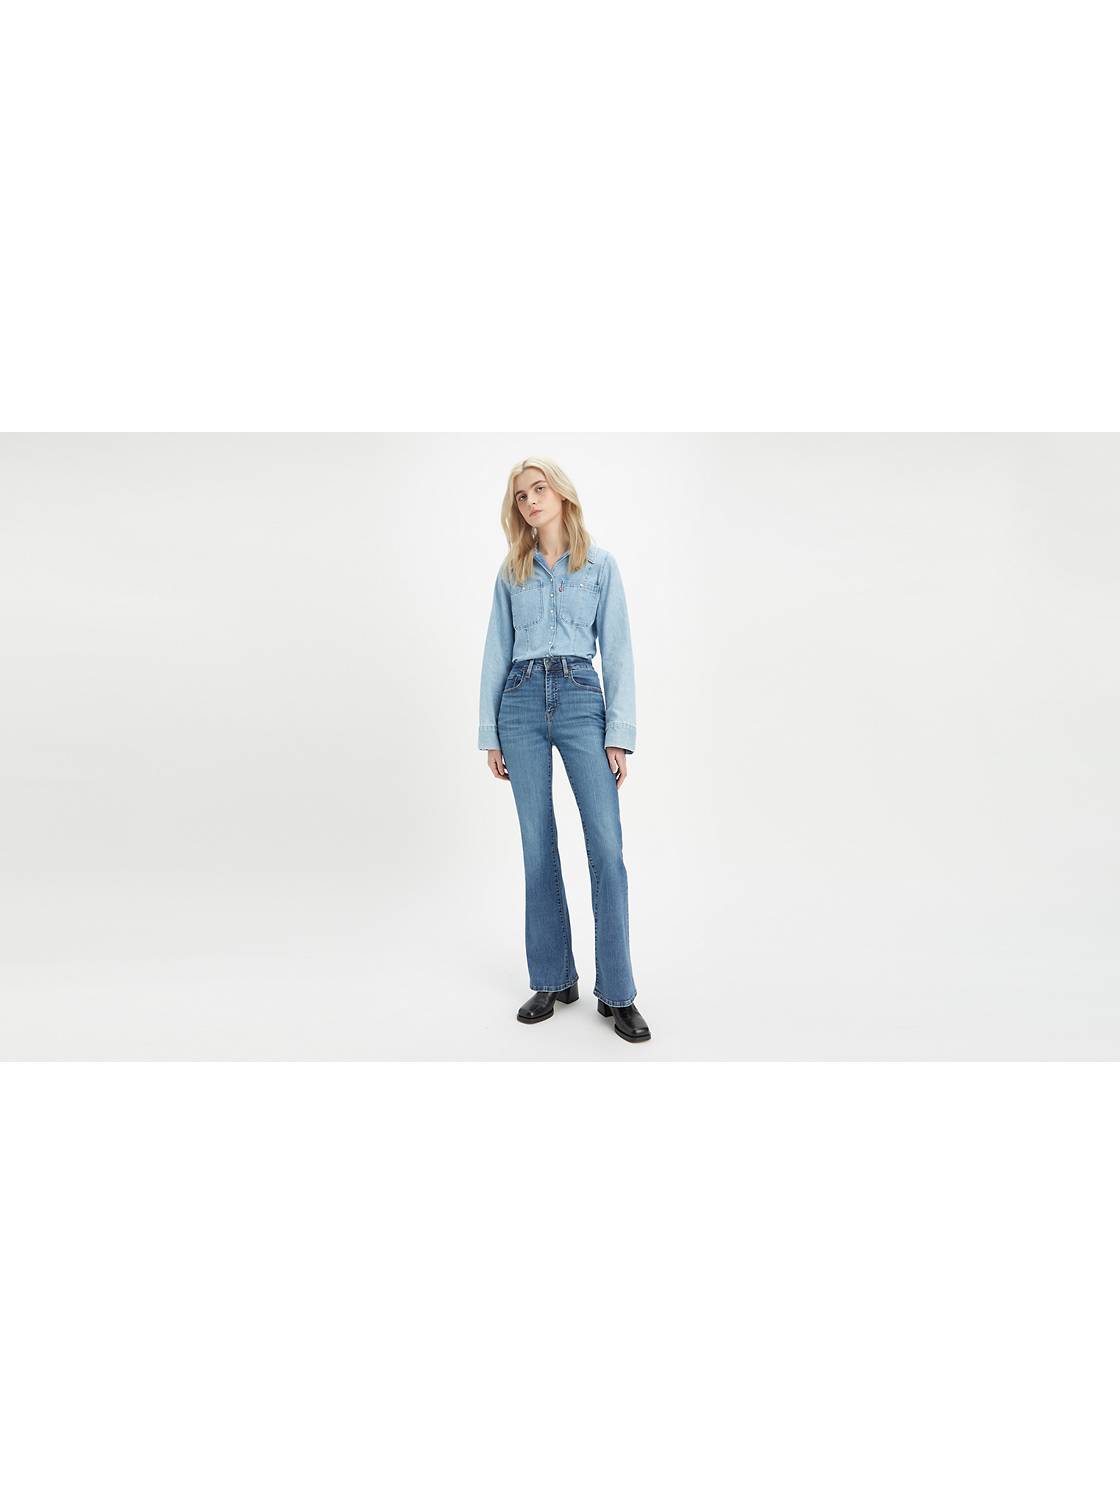 Women's Flare Jeans - Flare Fit Bell Bottom Jeans